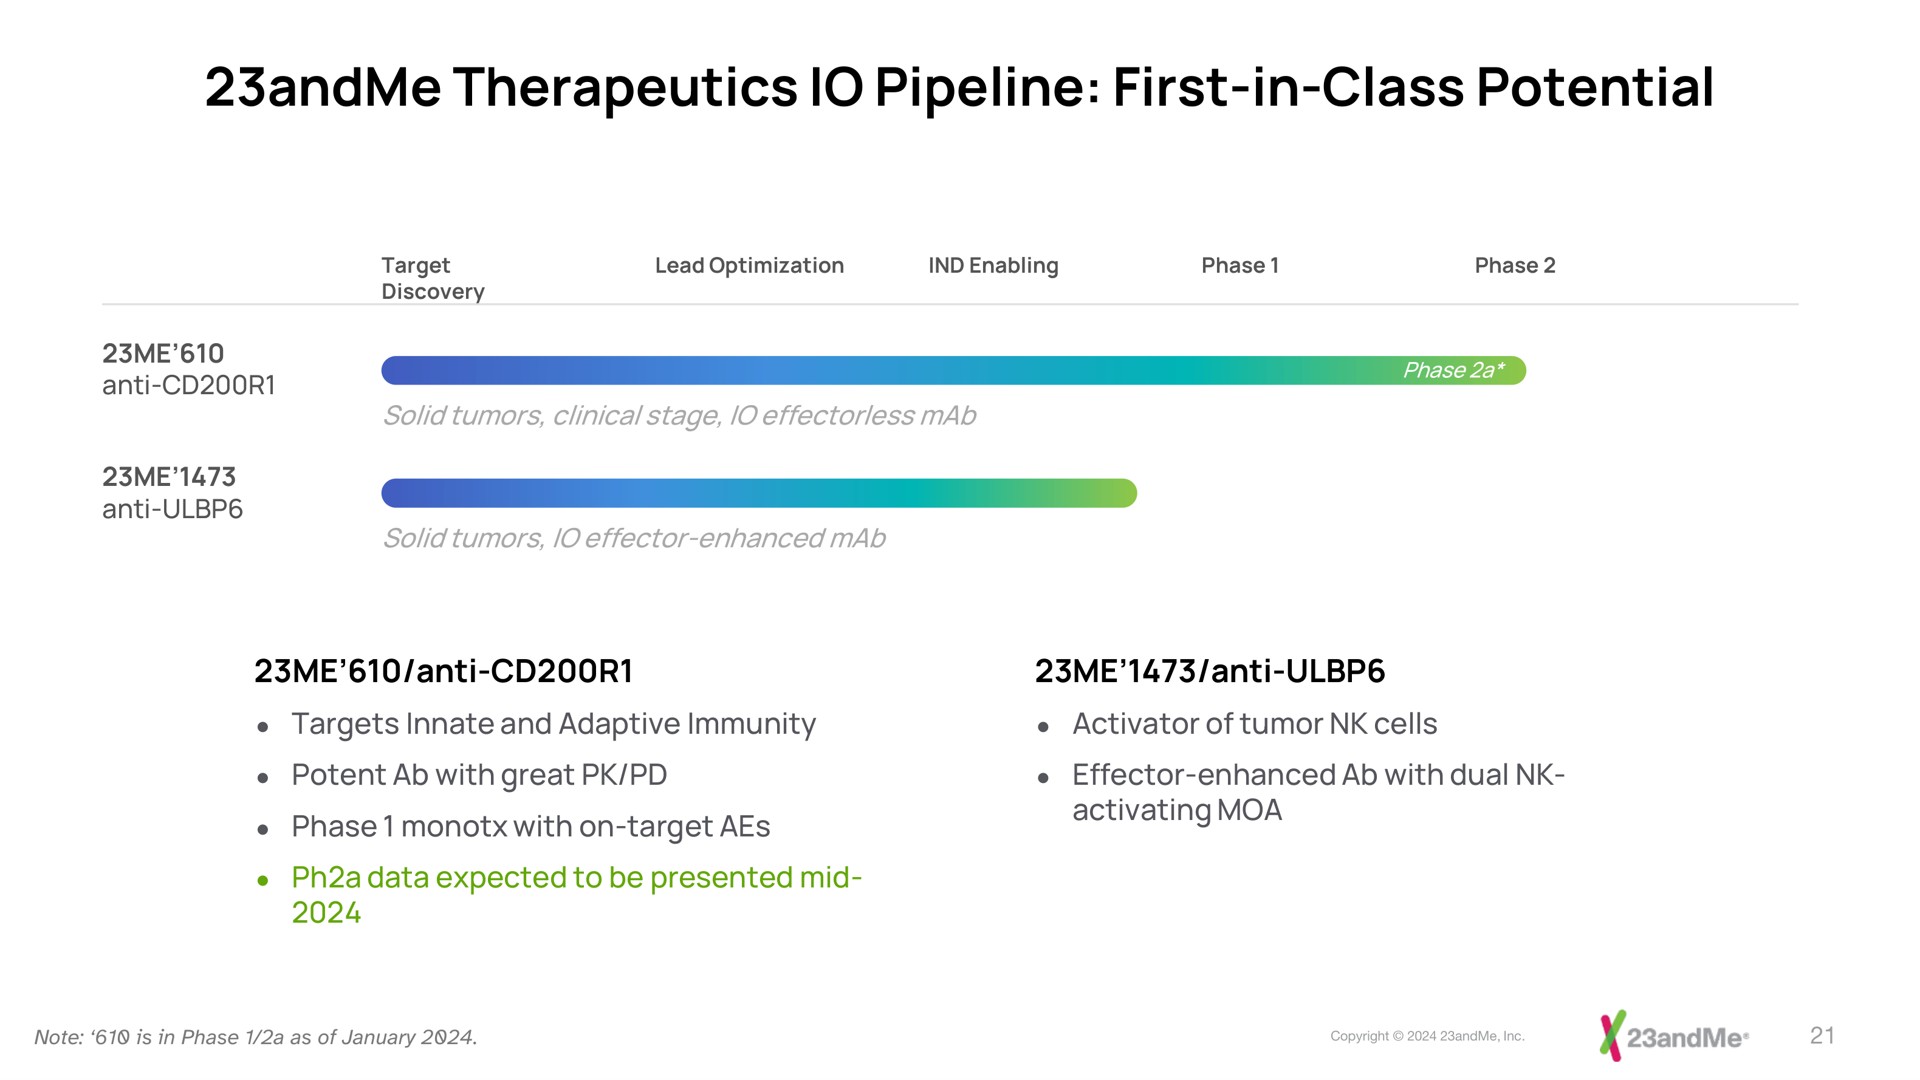 therapeutics pipeline first in class potential | 23andMe